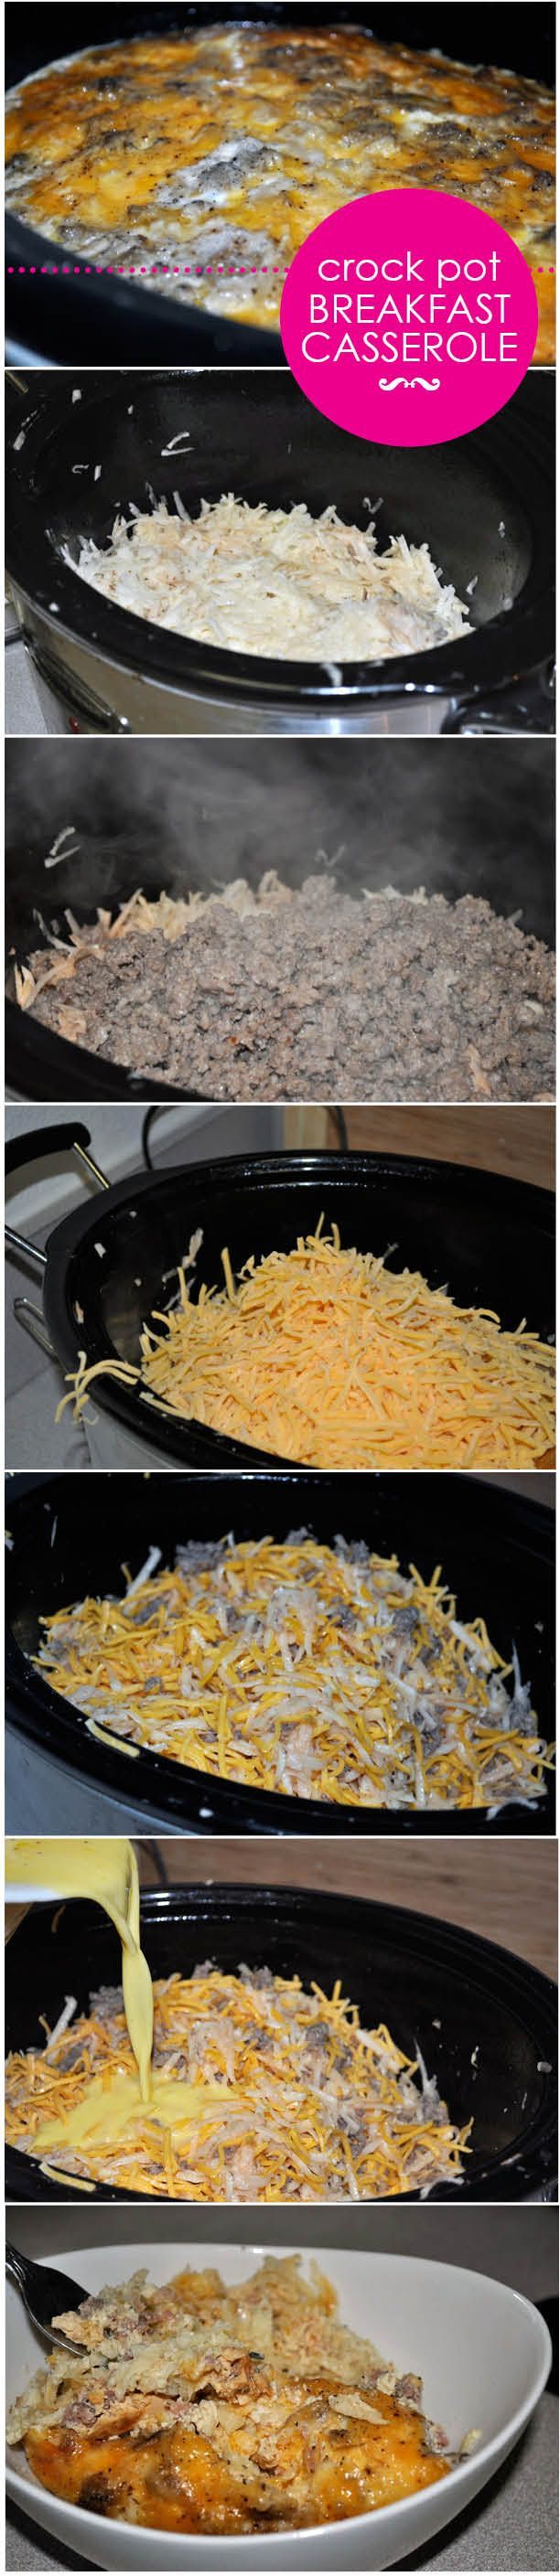 Crock Pot Breakfast Casserole-cooks while you sleep! I made this the other night and was ready when we woke up. So yummy!